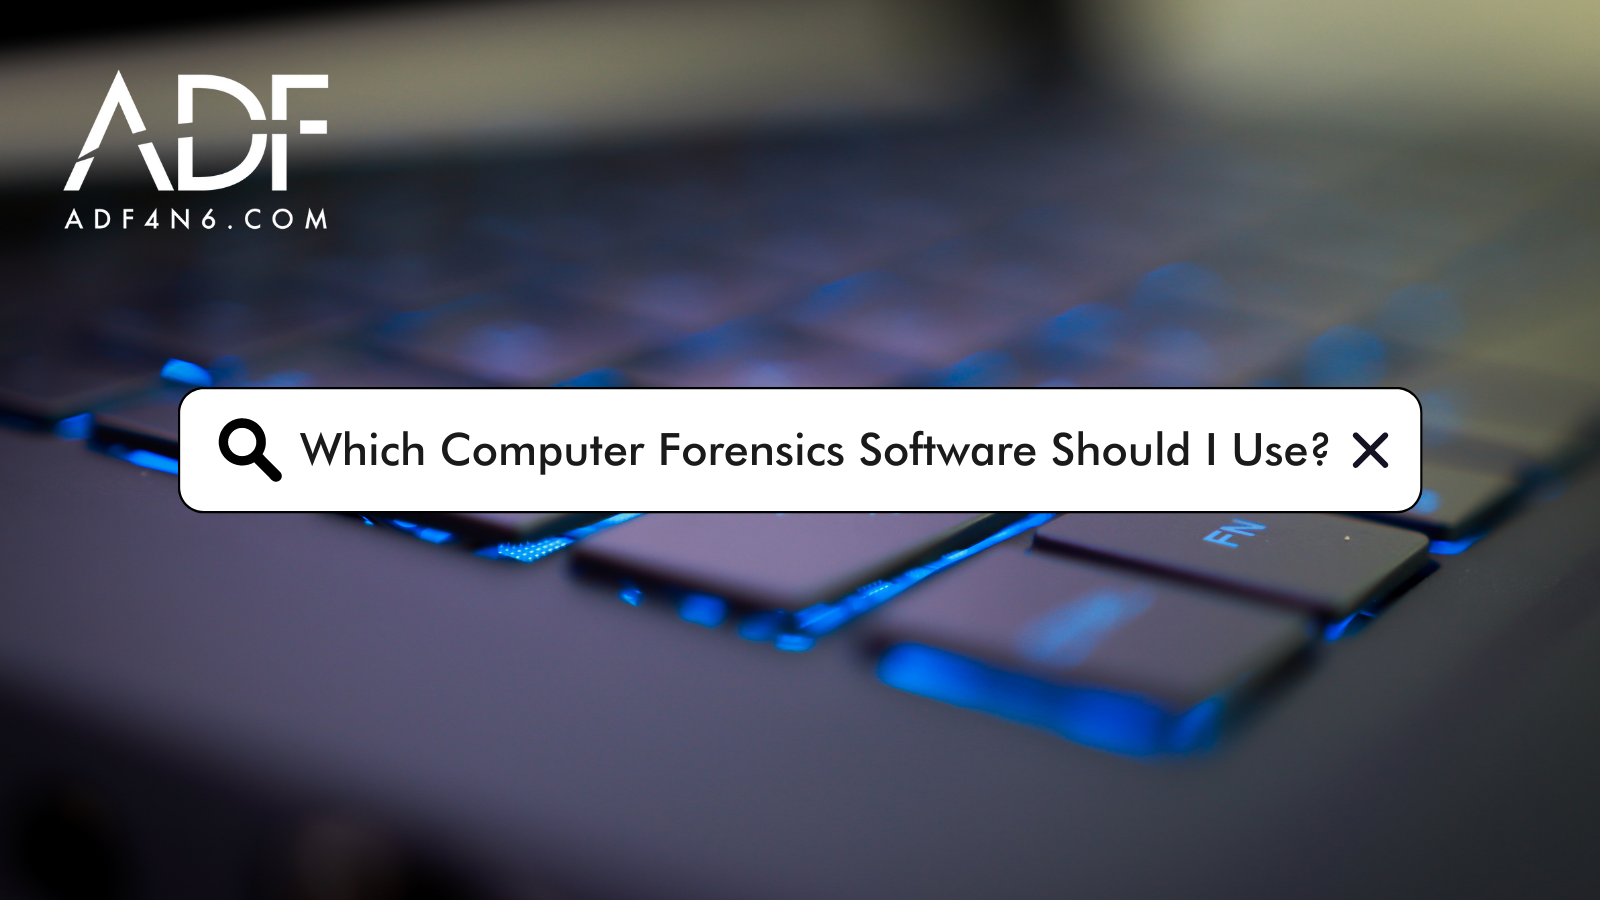 Essential Computer Forensics Software: 3 Software Tools To Know About